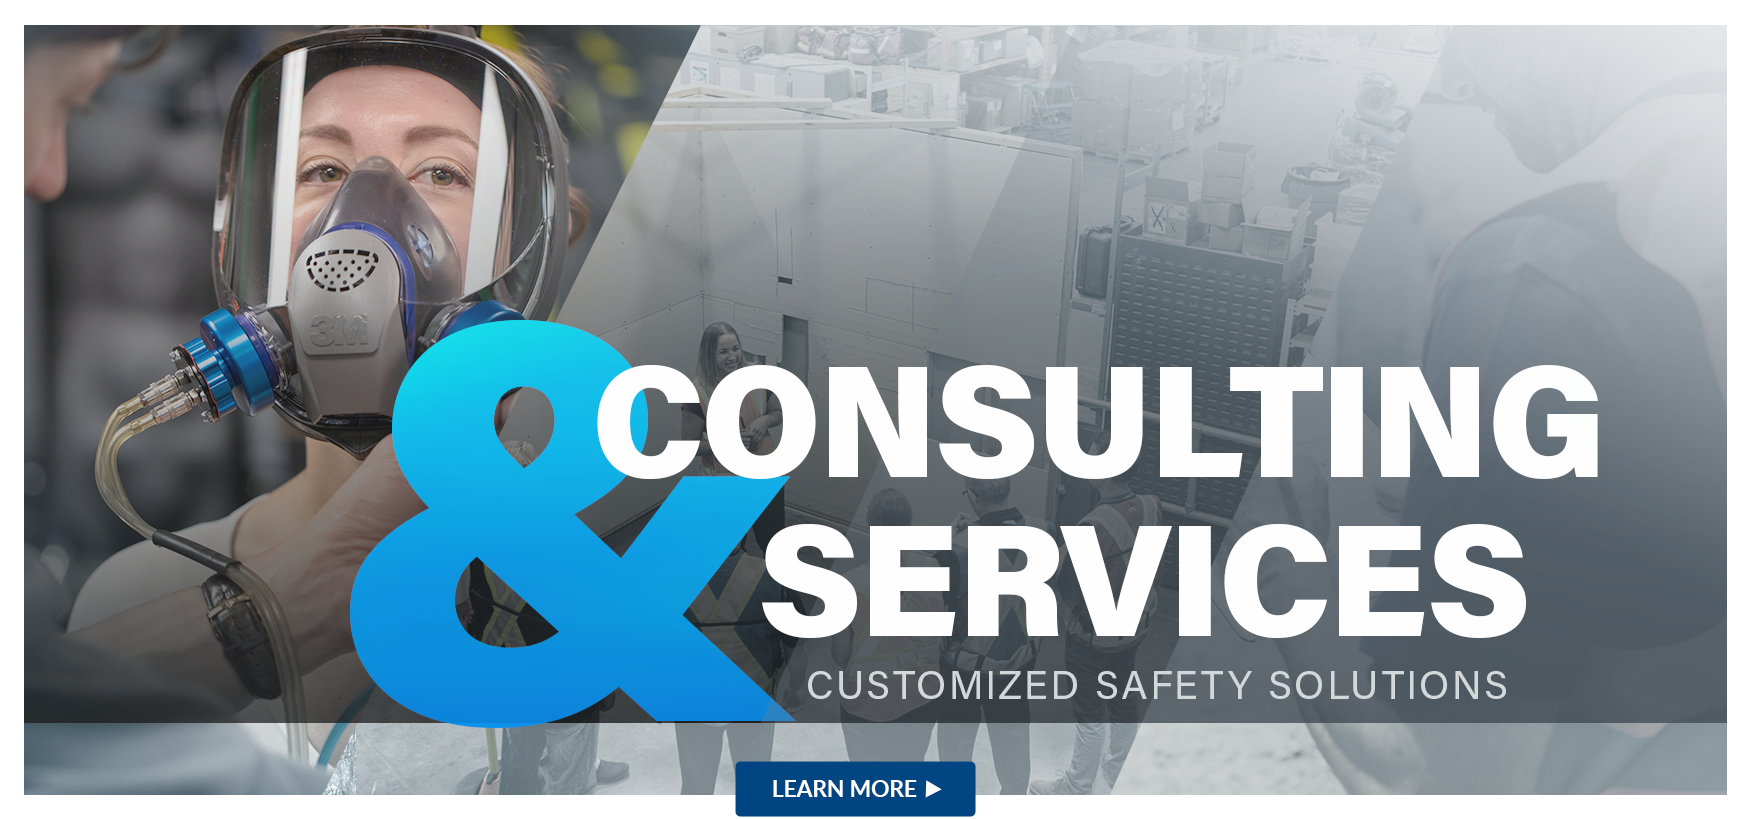 Customized safety services and consulting